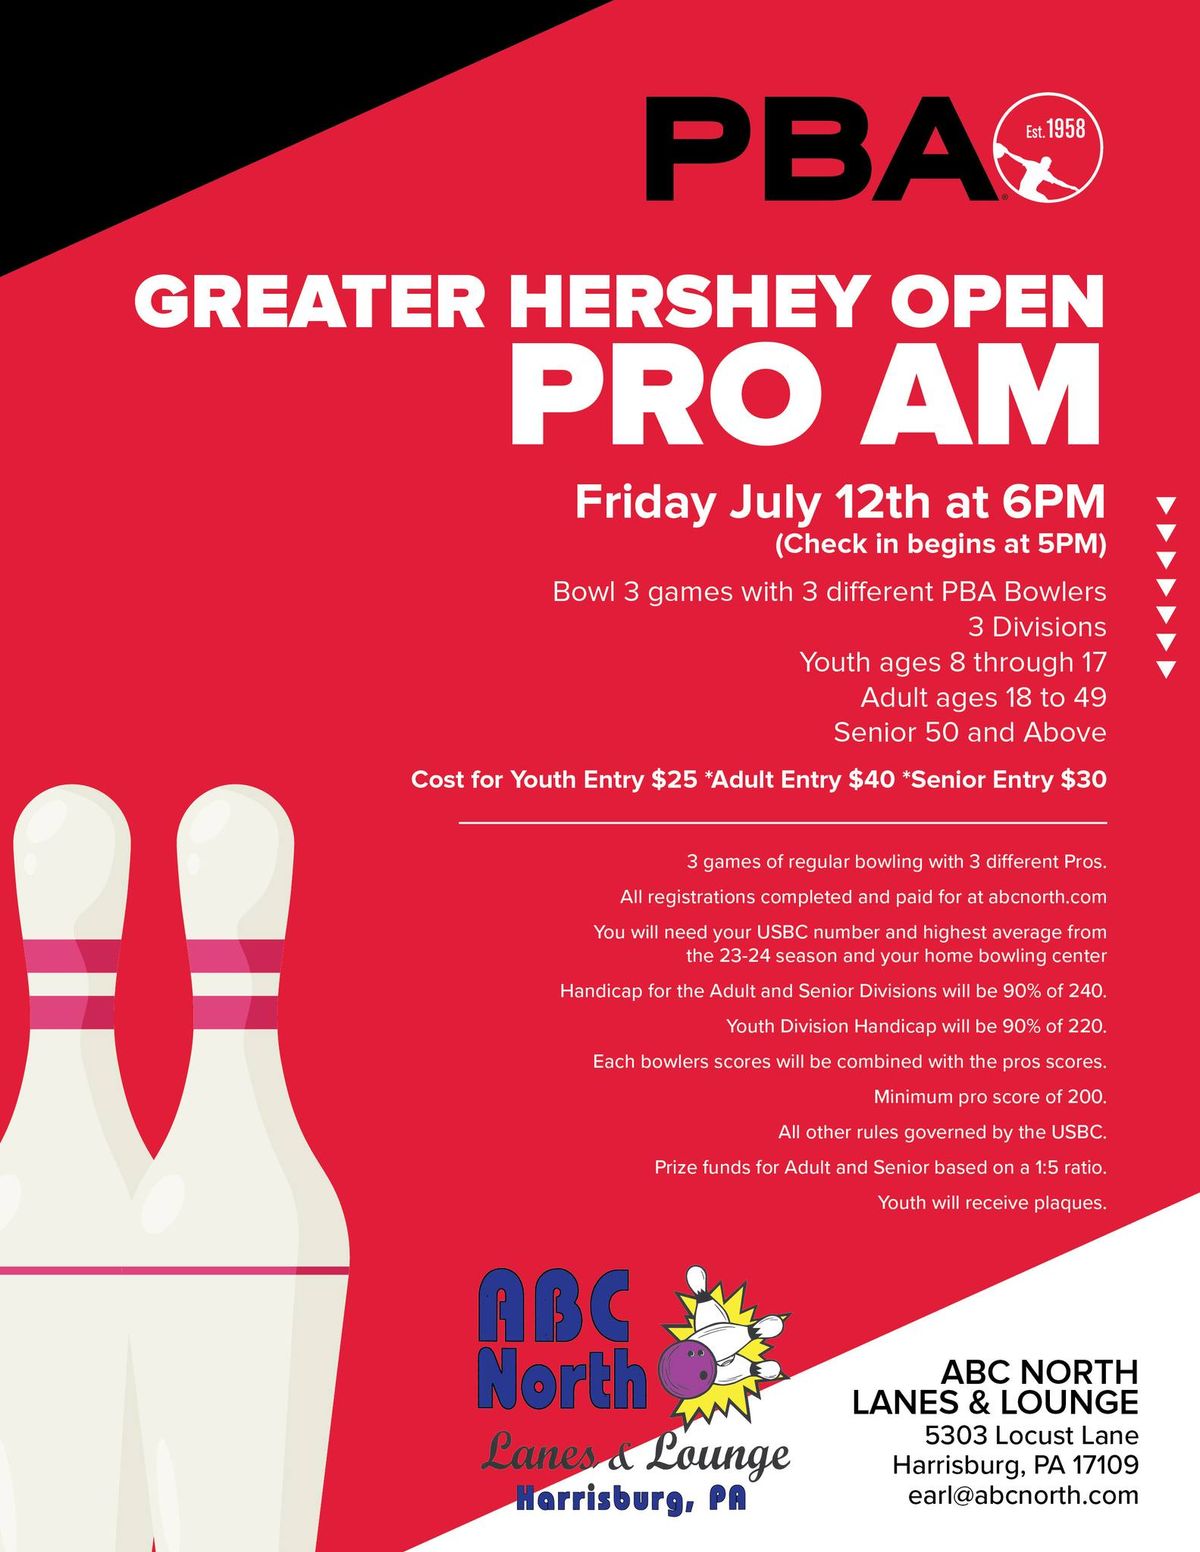 Pro Am for the Greater Hershey Open